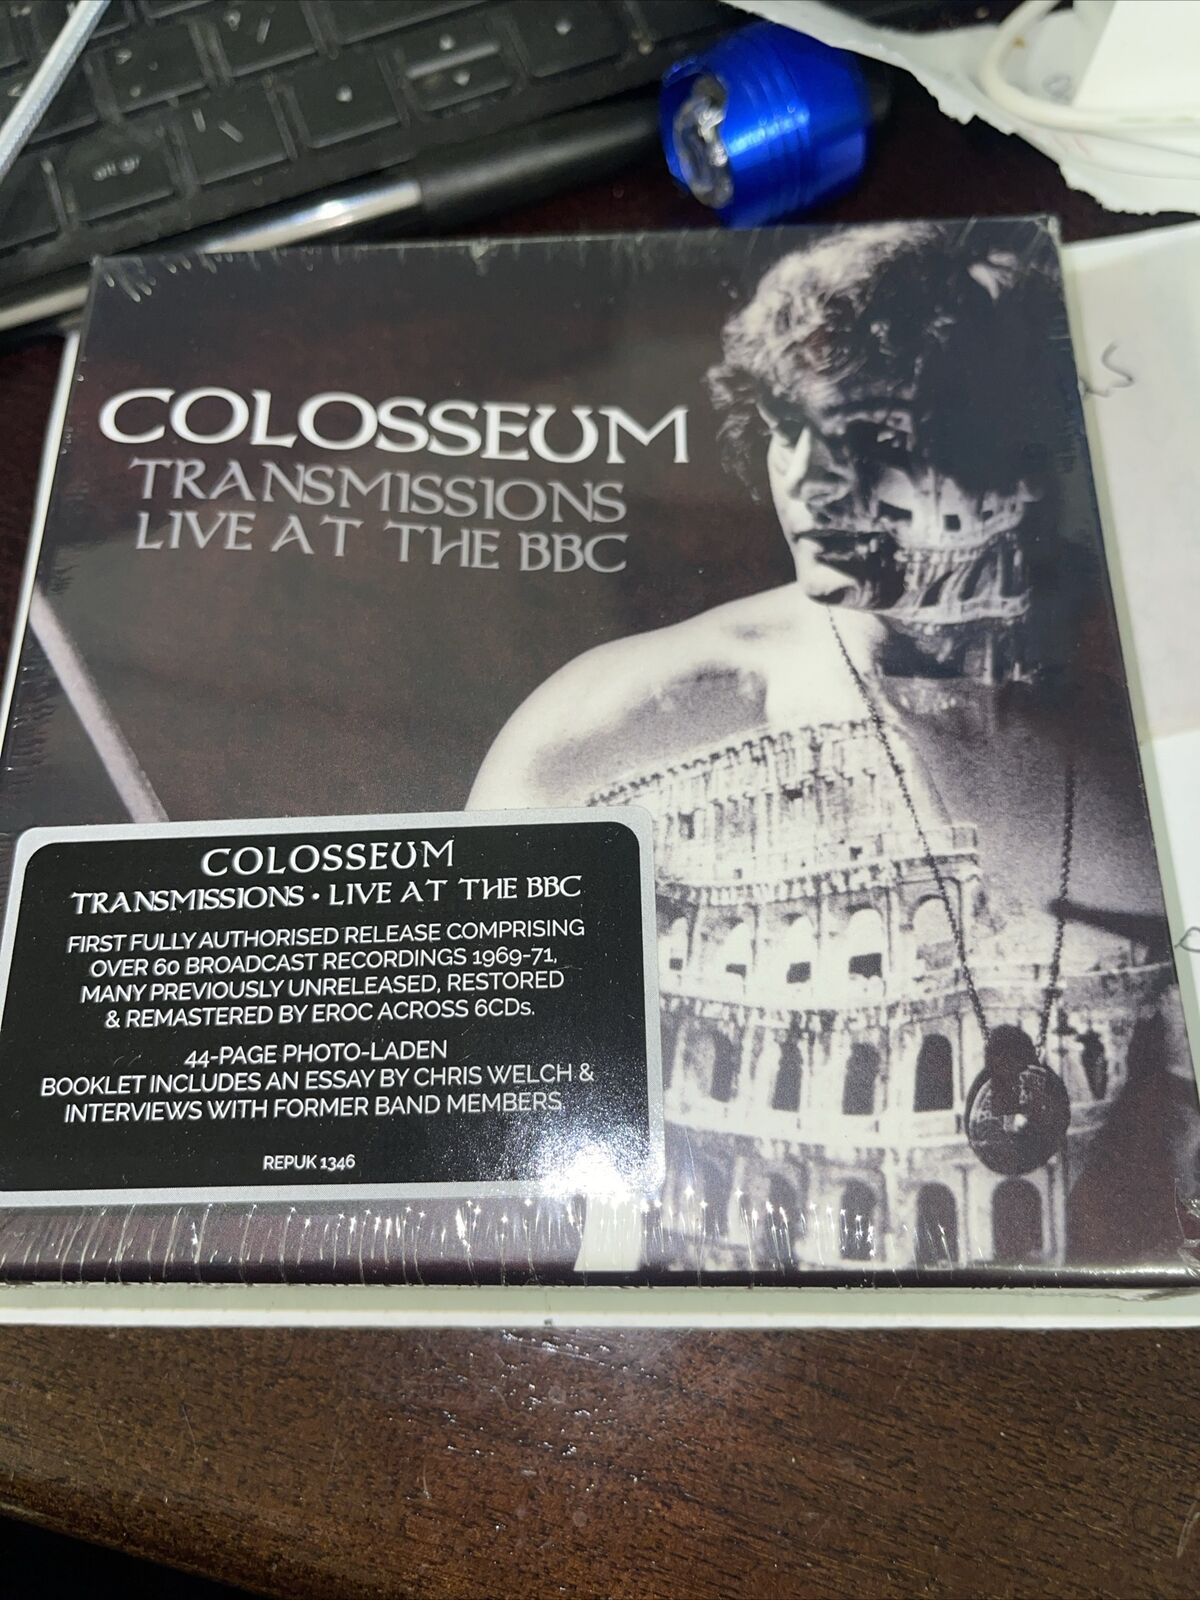 Colosseum Transmissions Live at the BBC (CD) Box Set (US IMPORT)